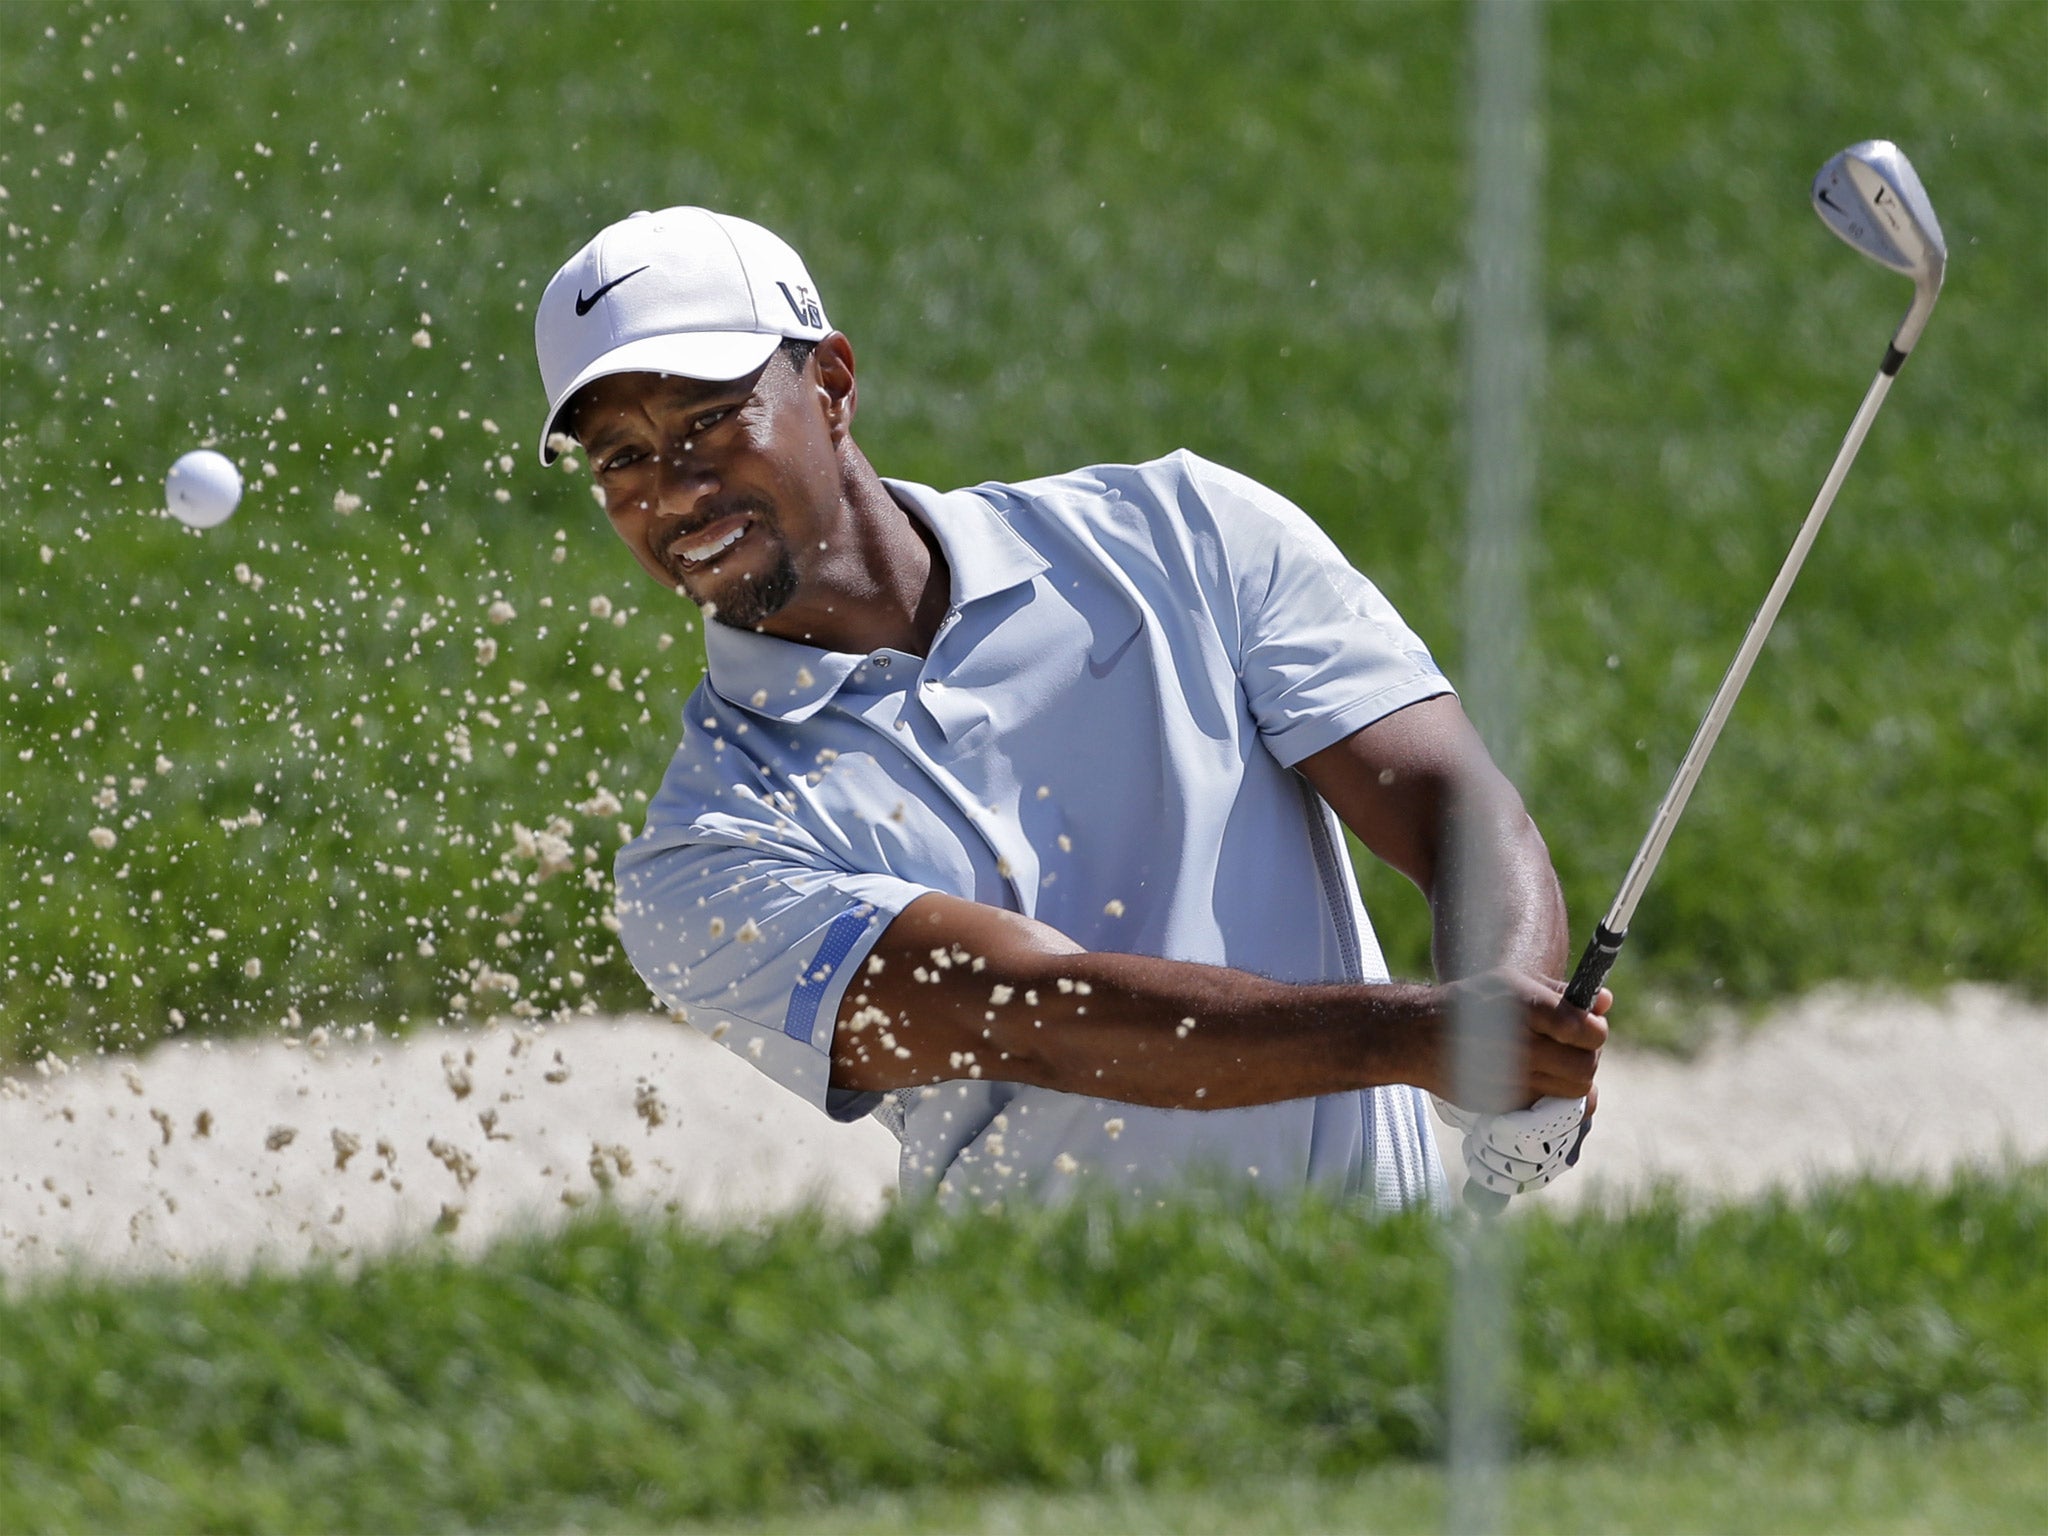 Tiger Woods hits a shot from the bunker on the fifth hole at the WGC-Bridgestone Invitational event